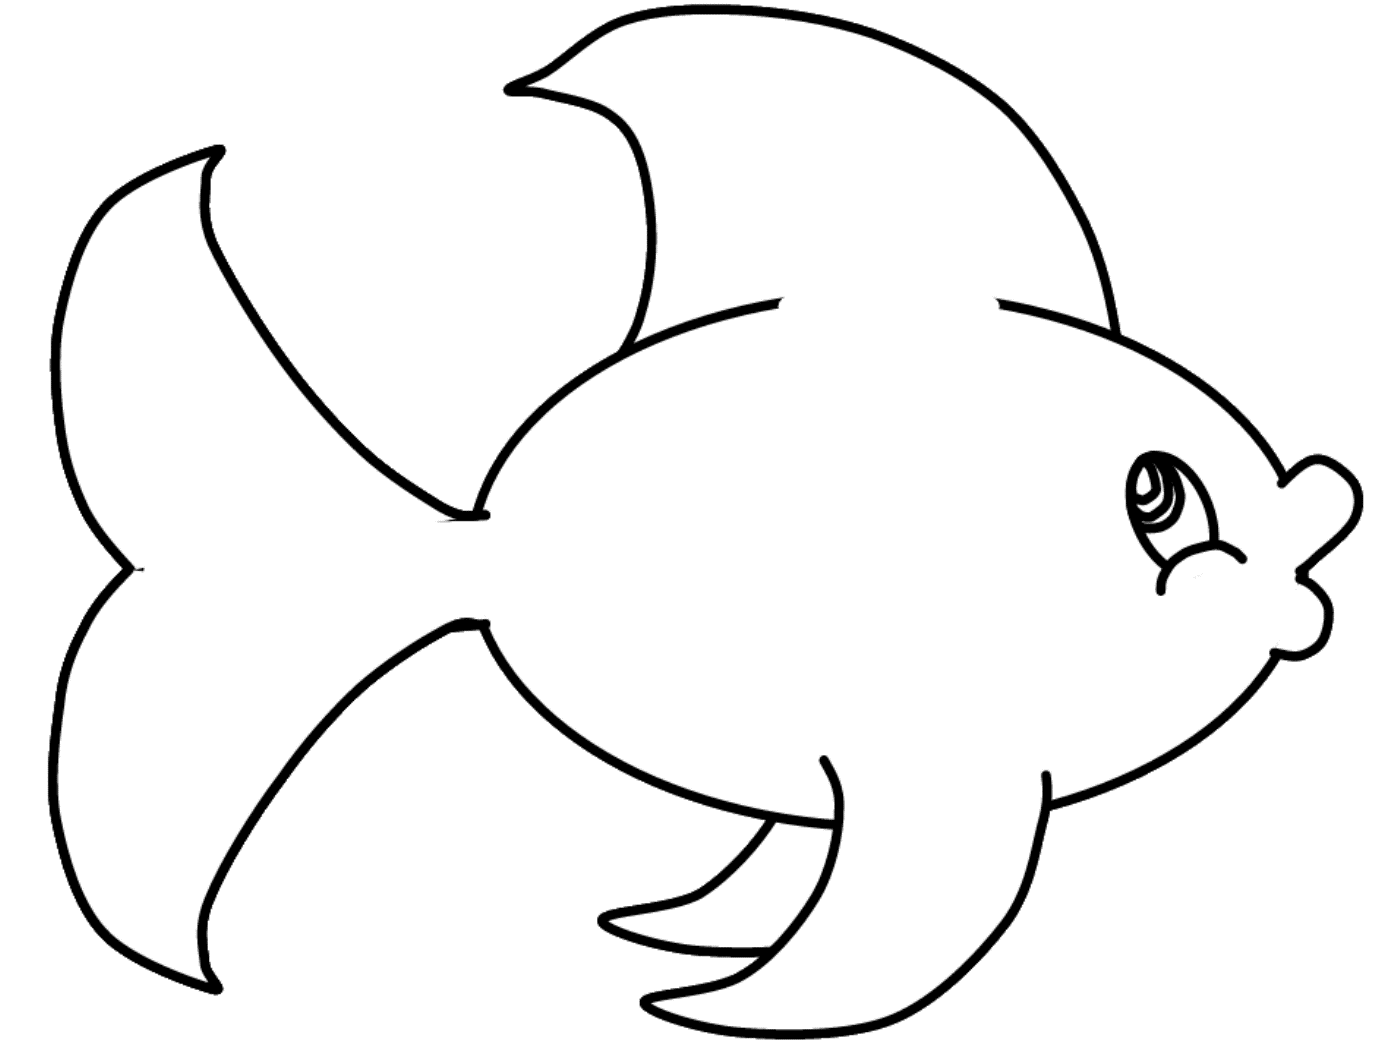 fish clipart to color - photo #33